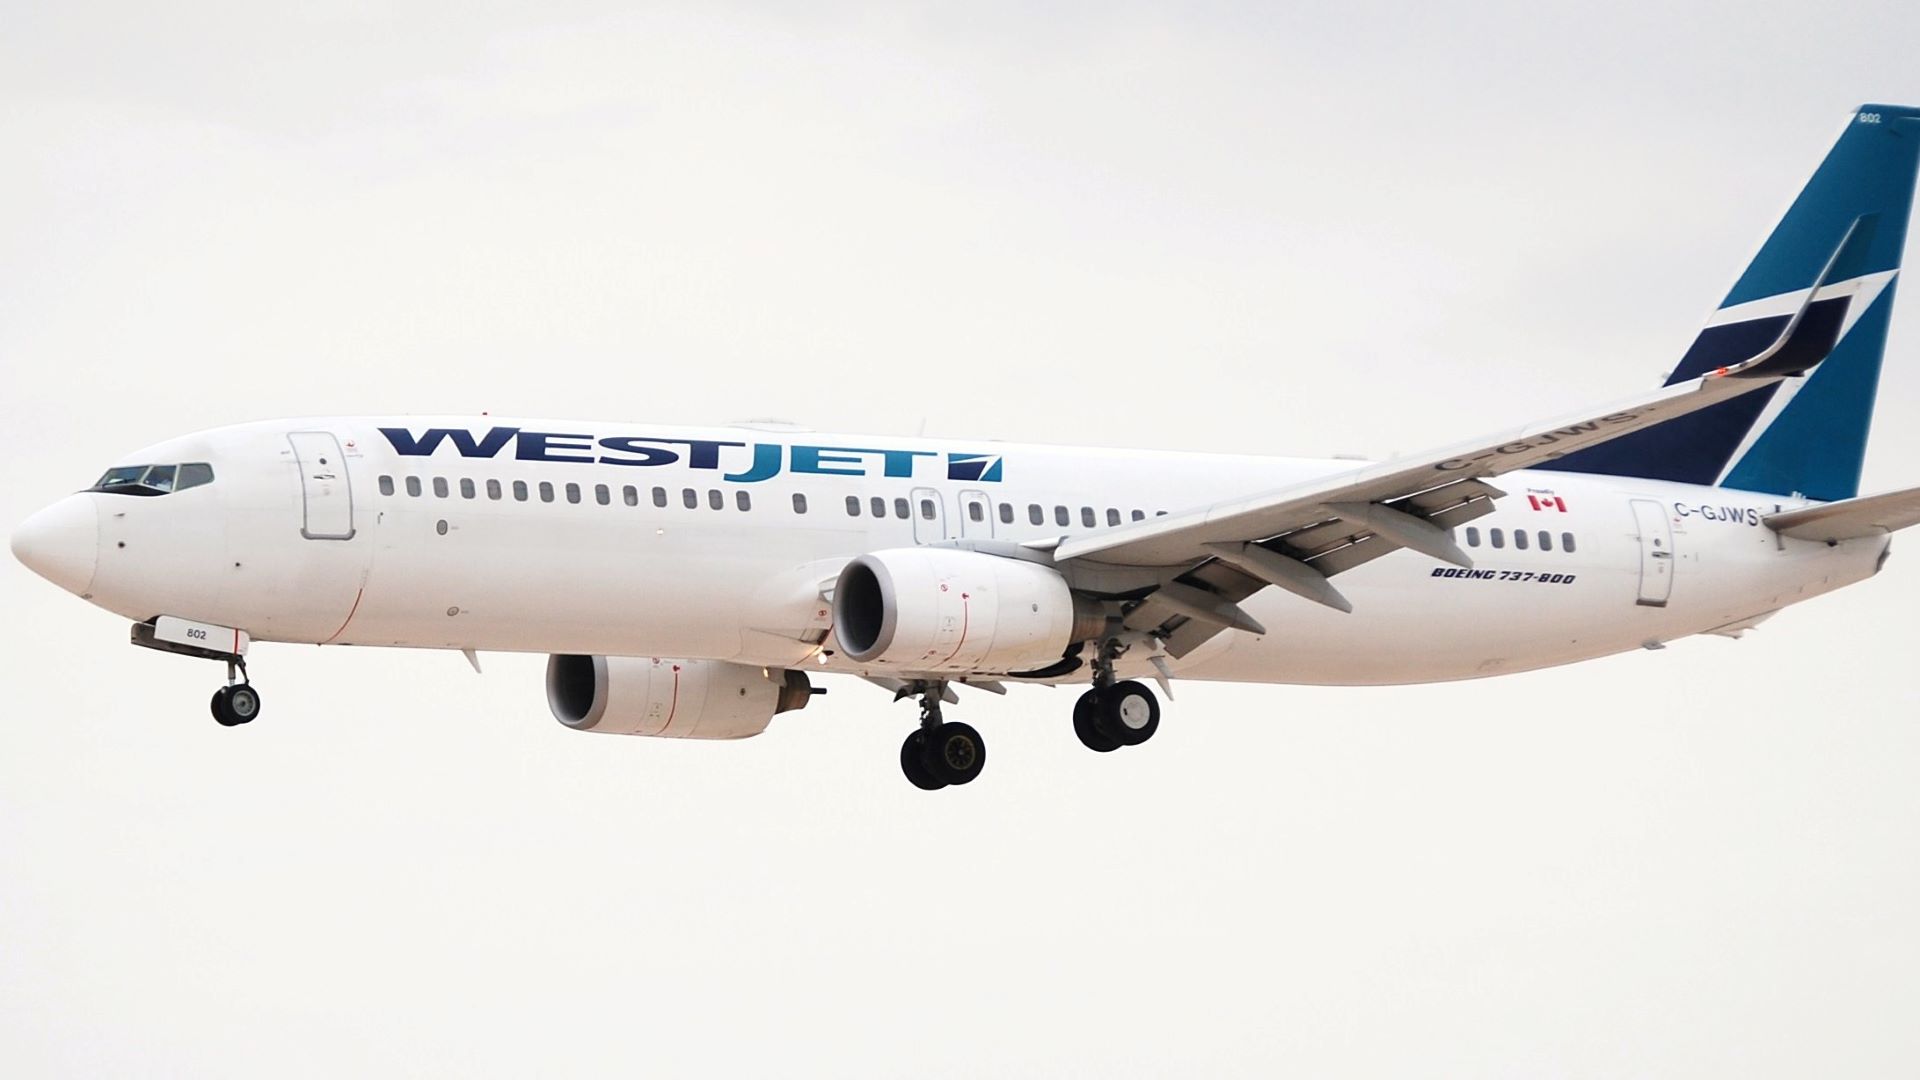 A white WestJet plane with wheels down comes in for landing. Plane has green tail.